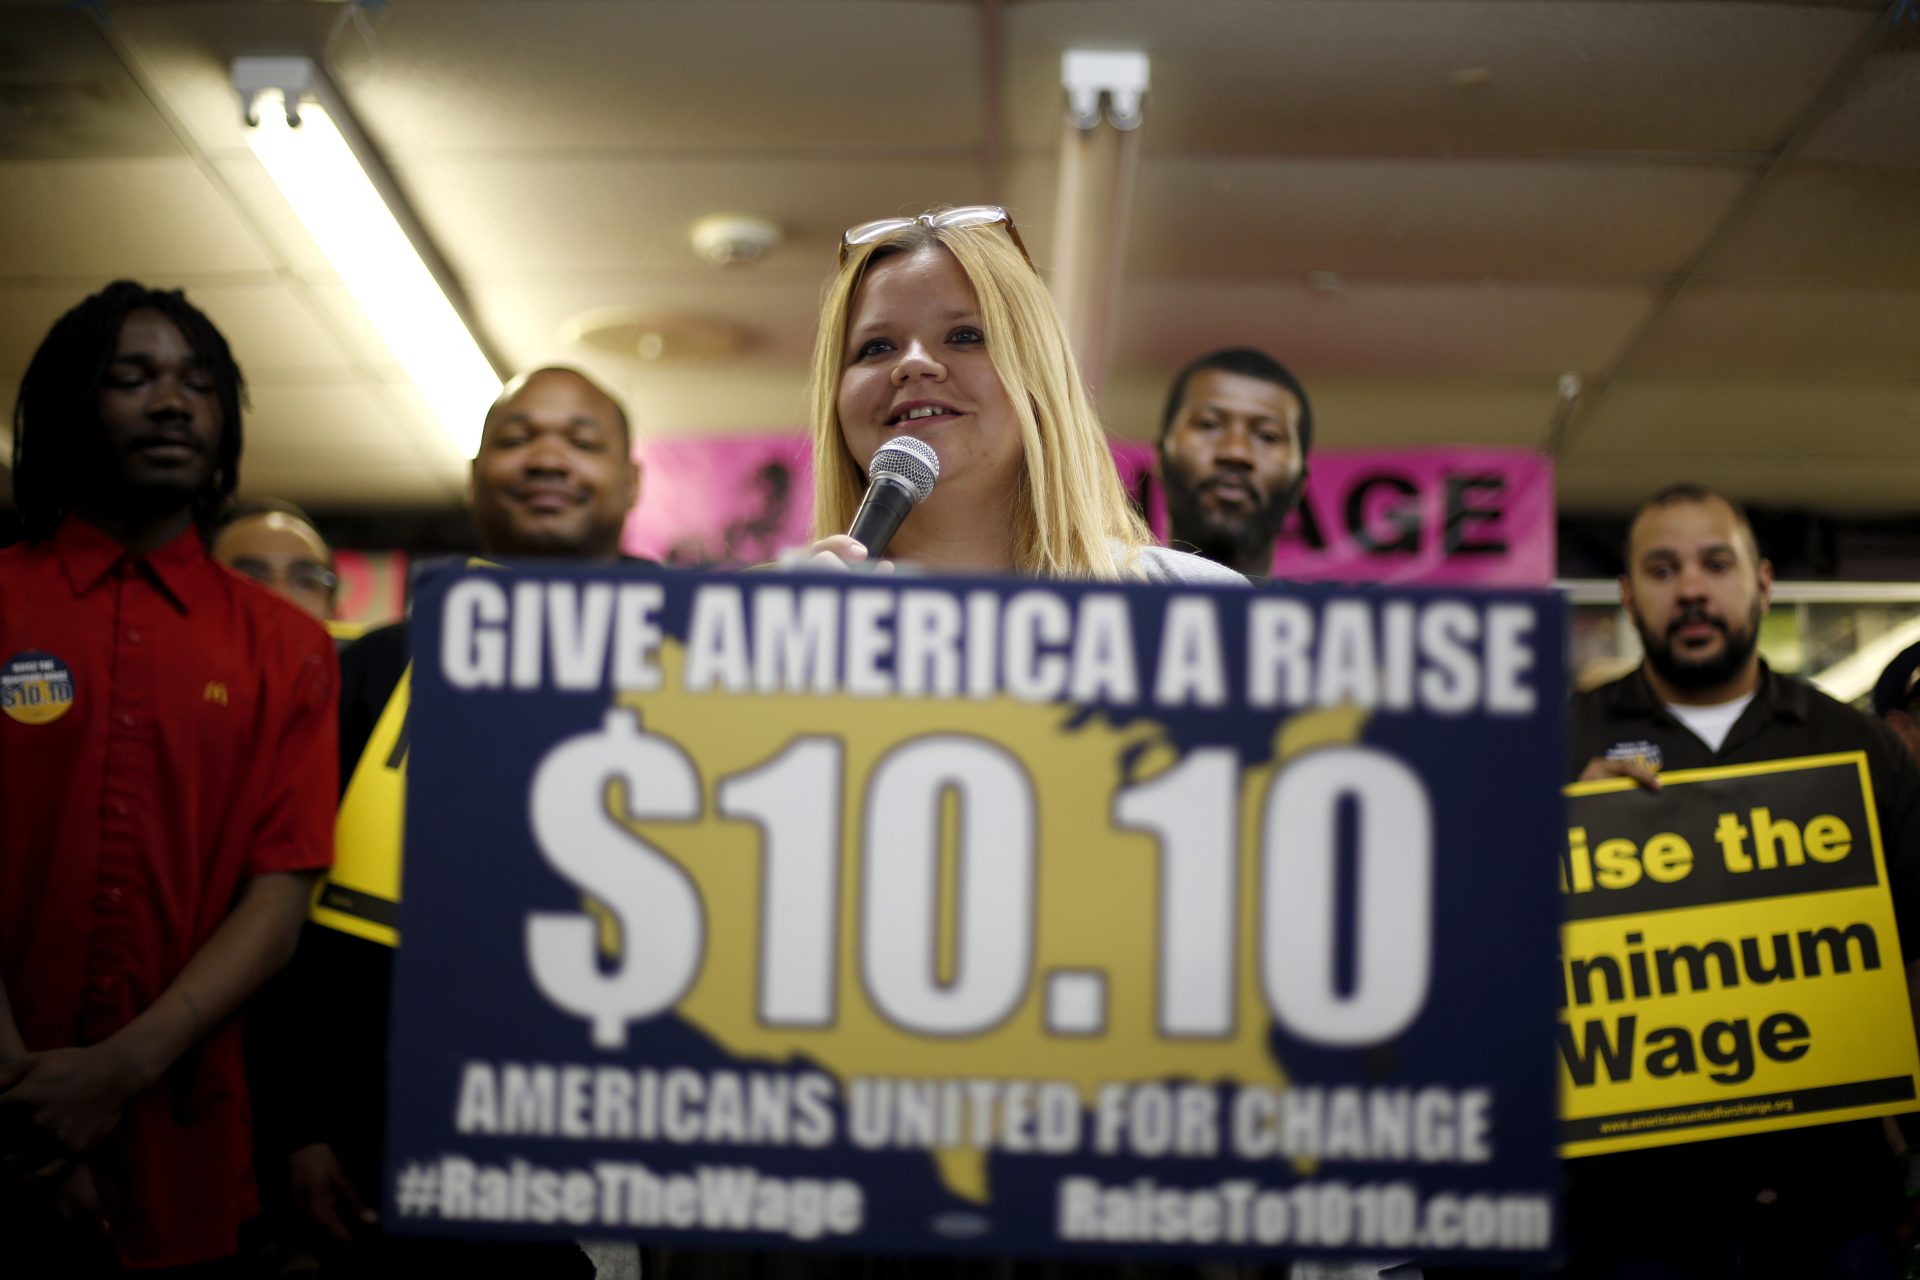 In this April 2014 photo, Amy Jennewein speaks during a rally in support of raising the minimum wage in Missouri. An increase passed as a ballot initiative in 2018.